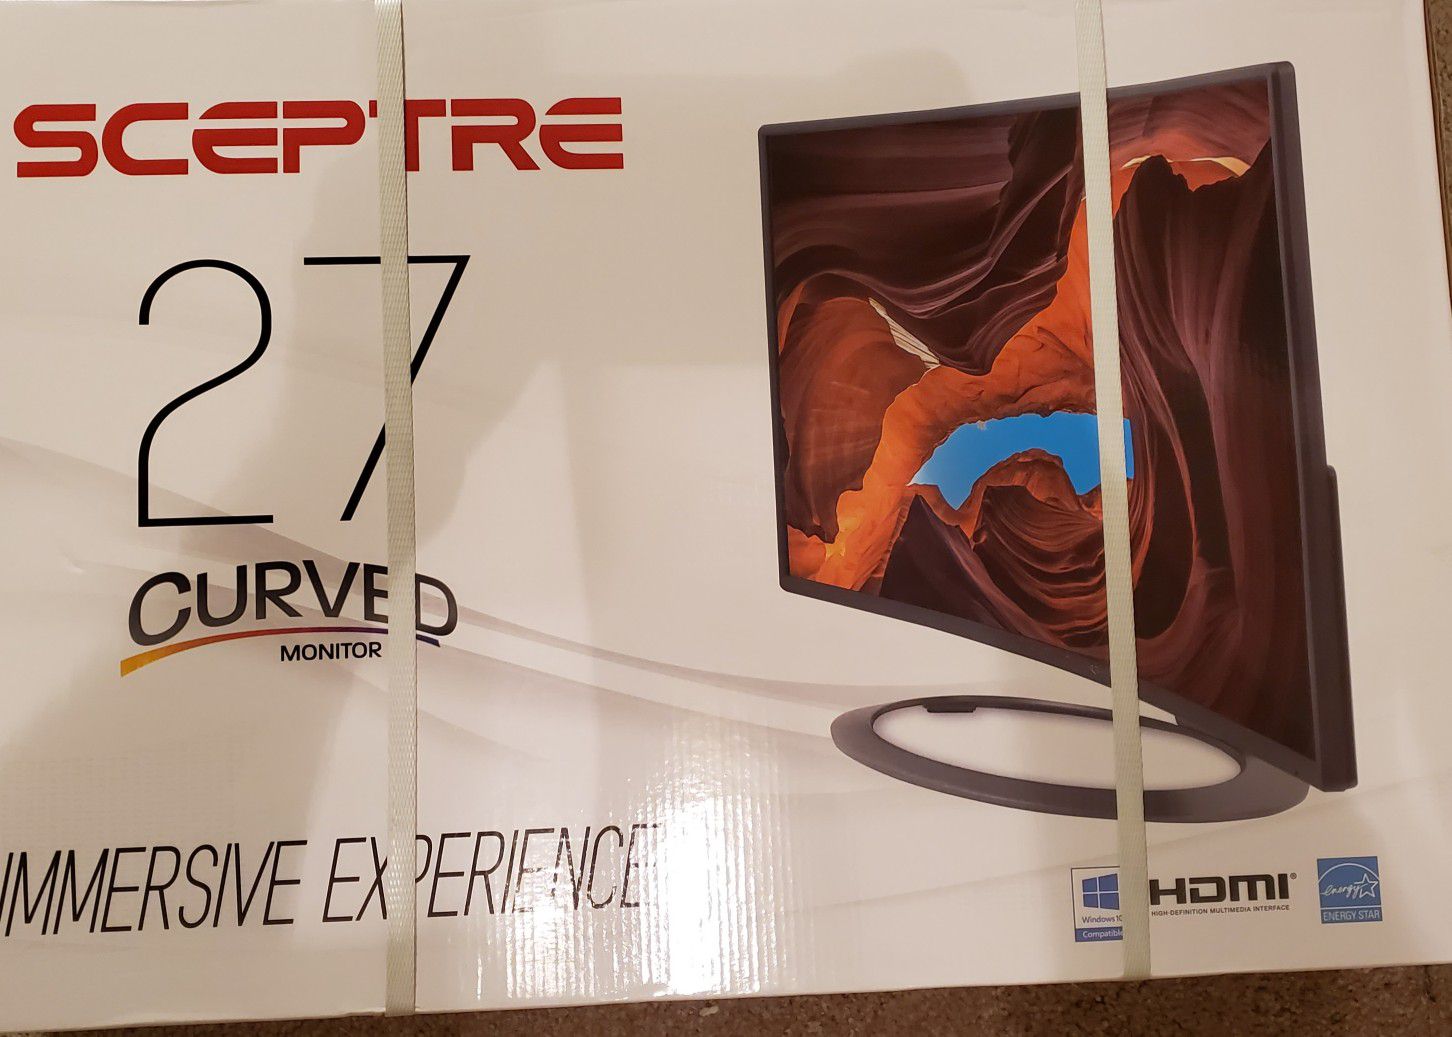 Sceptre 27" 1080 curved gaming monitor